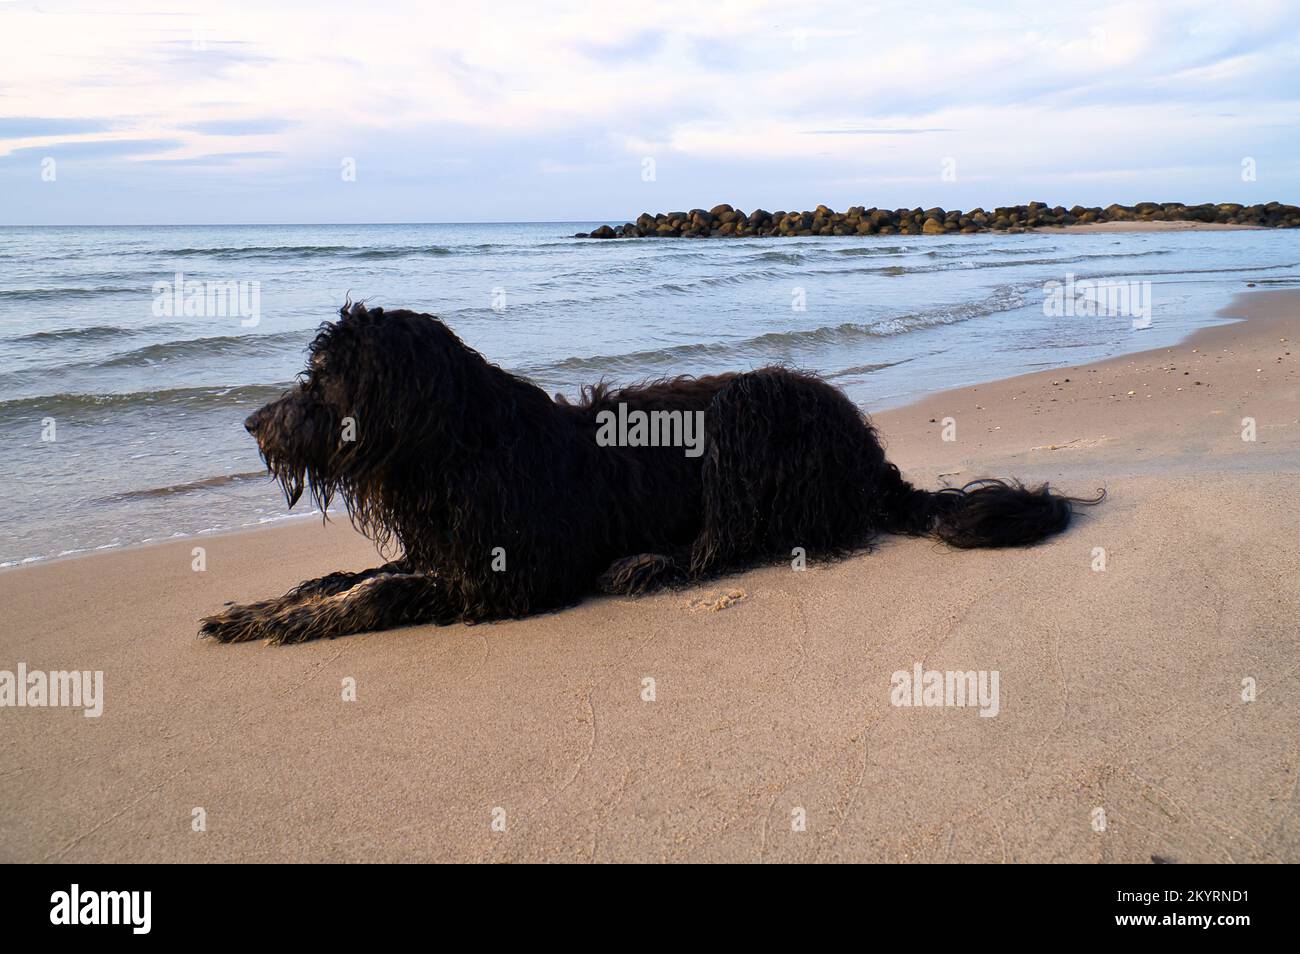 Goldendoodle is lying on the beach by the sea and ready to play. Waves in the water and sand on the beach. Landscape shot with a dog Stock Photo